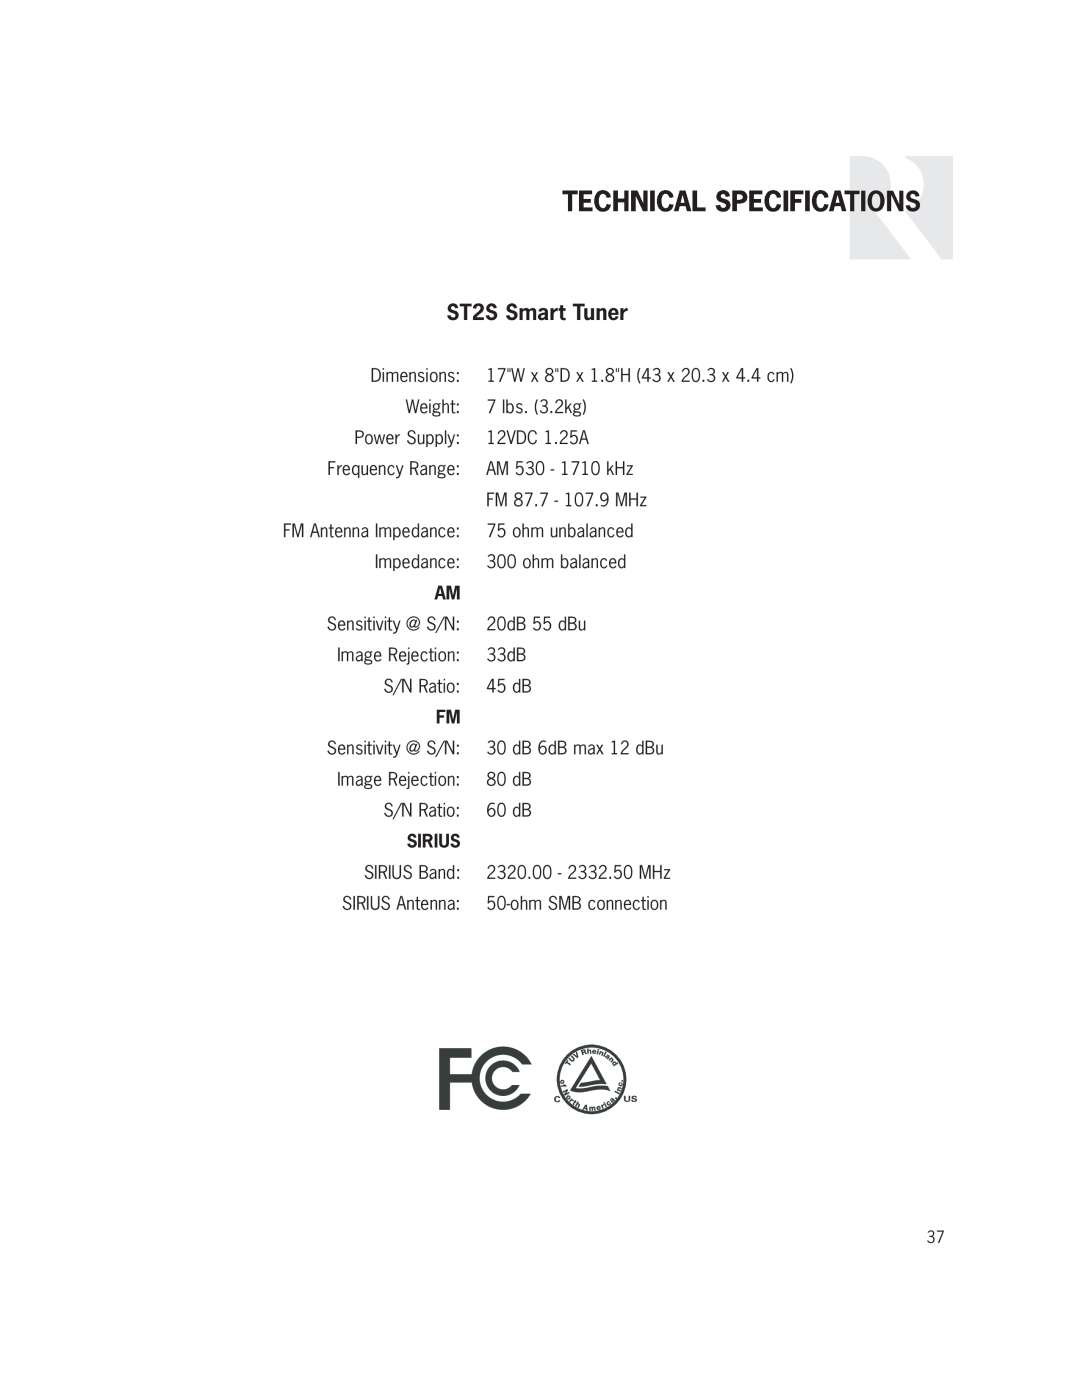 Russound installation manual Technical Specifications, ST2S Smart Tuner 